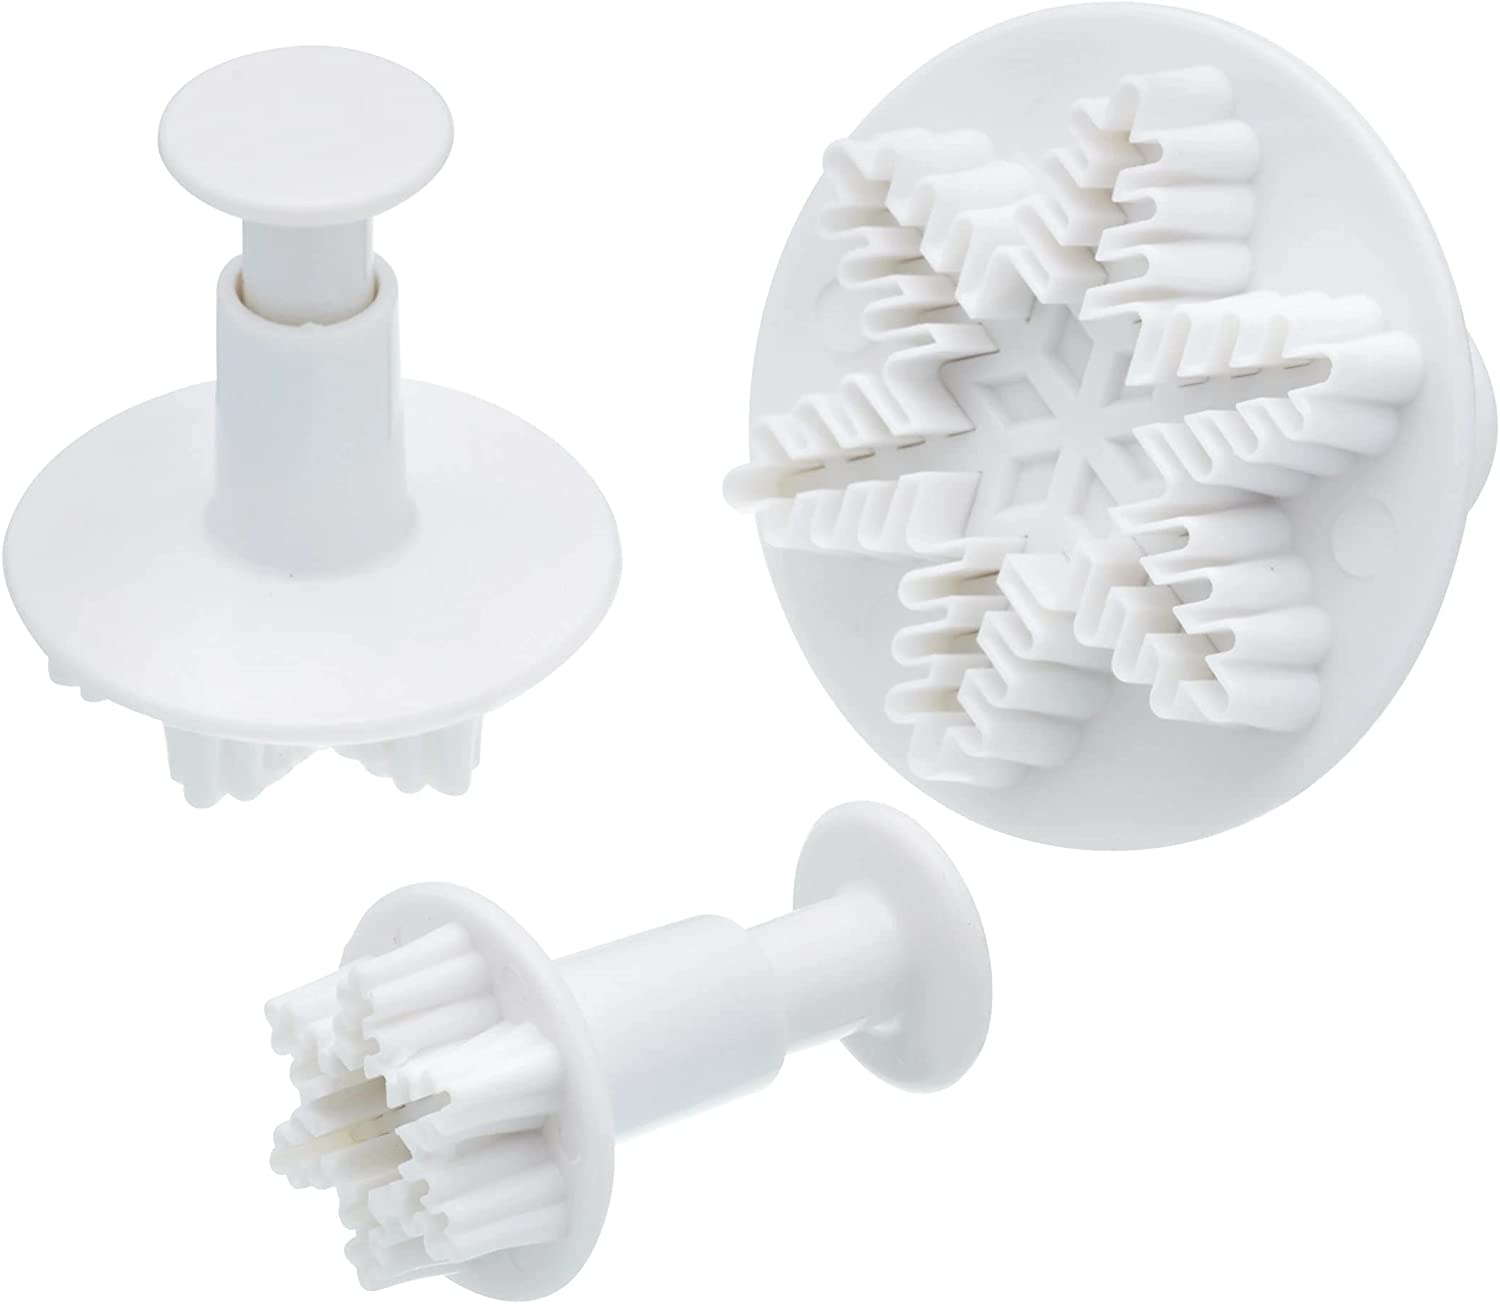 KitchenCraft Sweetly Does It Set of 3 Snowflake Fondant Plunger Cutters